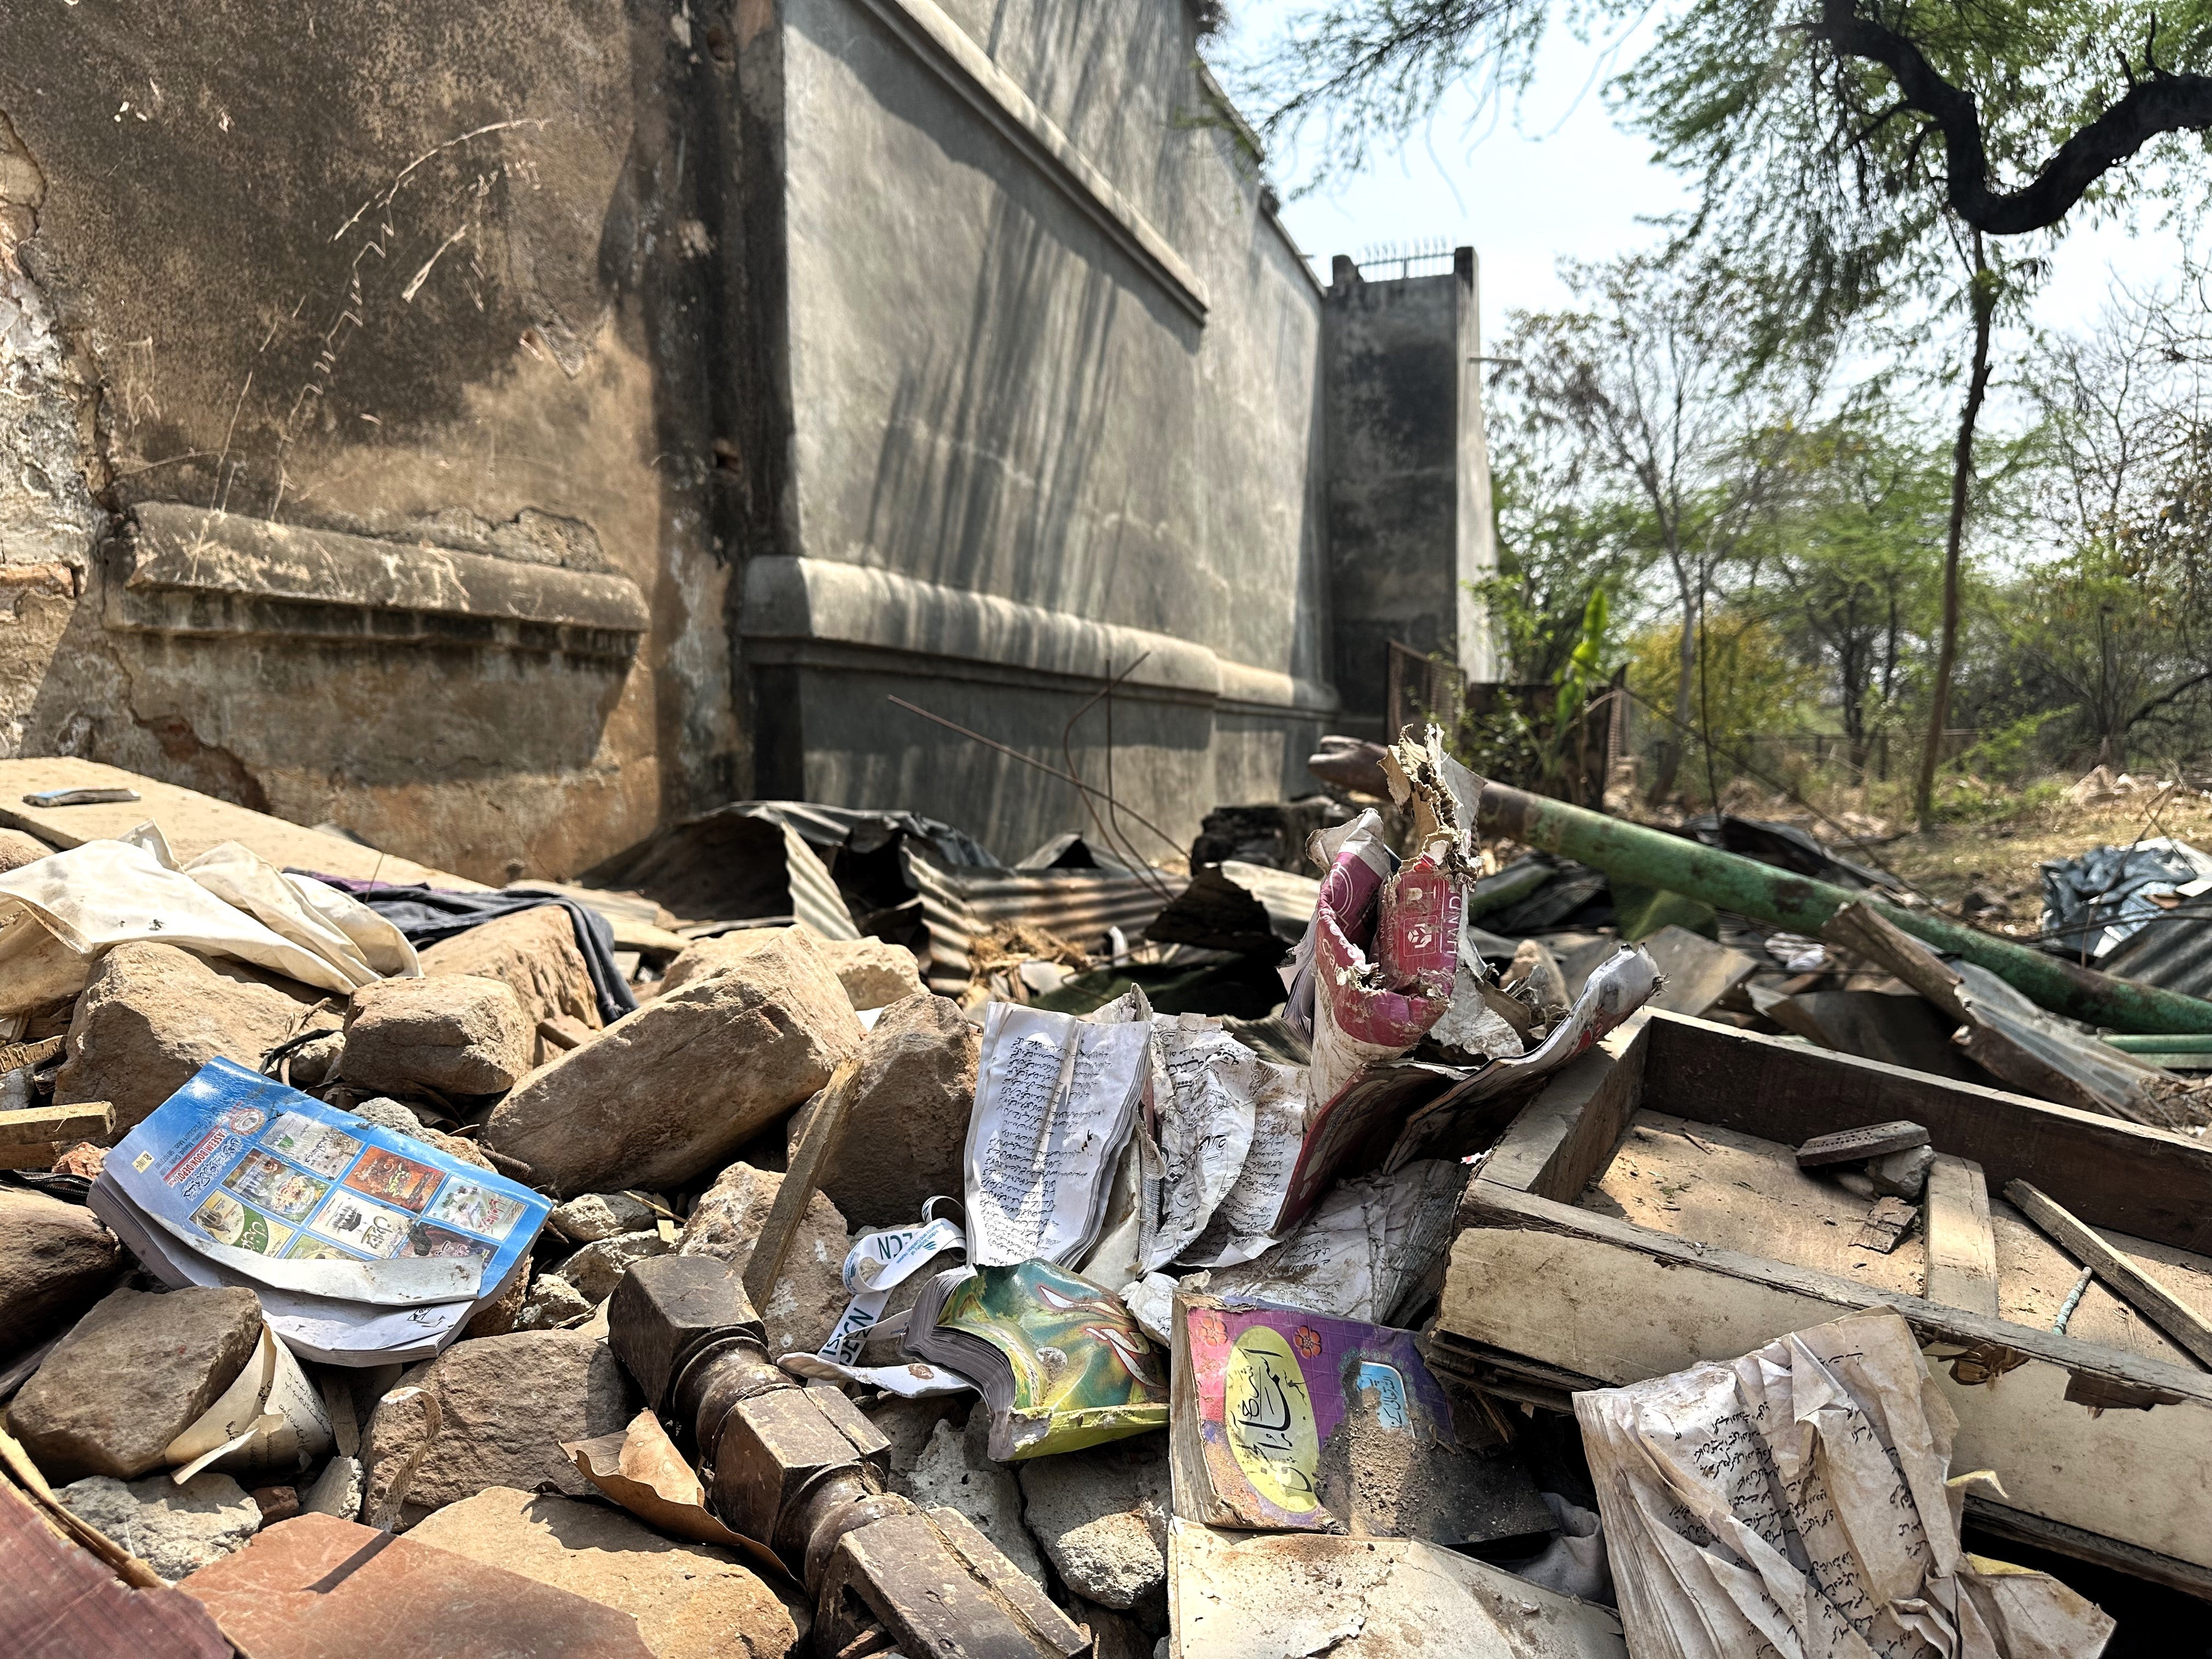 Rubble from the Akhoondji Mosque strewn with books from the associated Islamic school